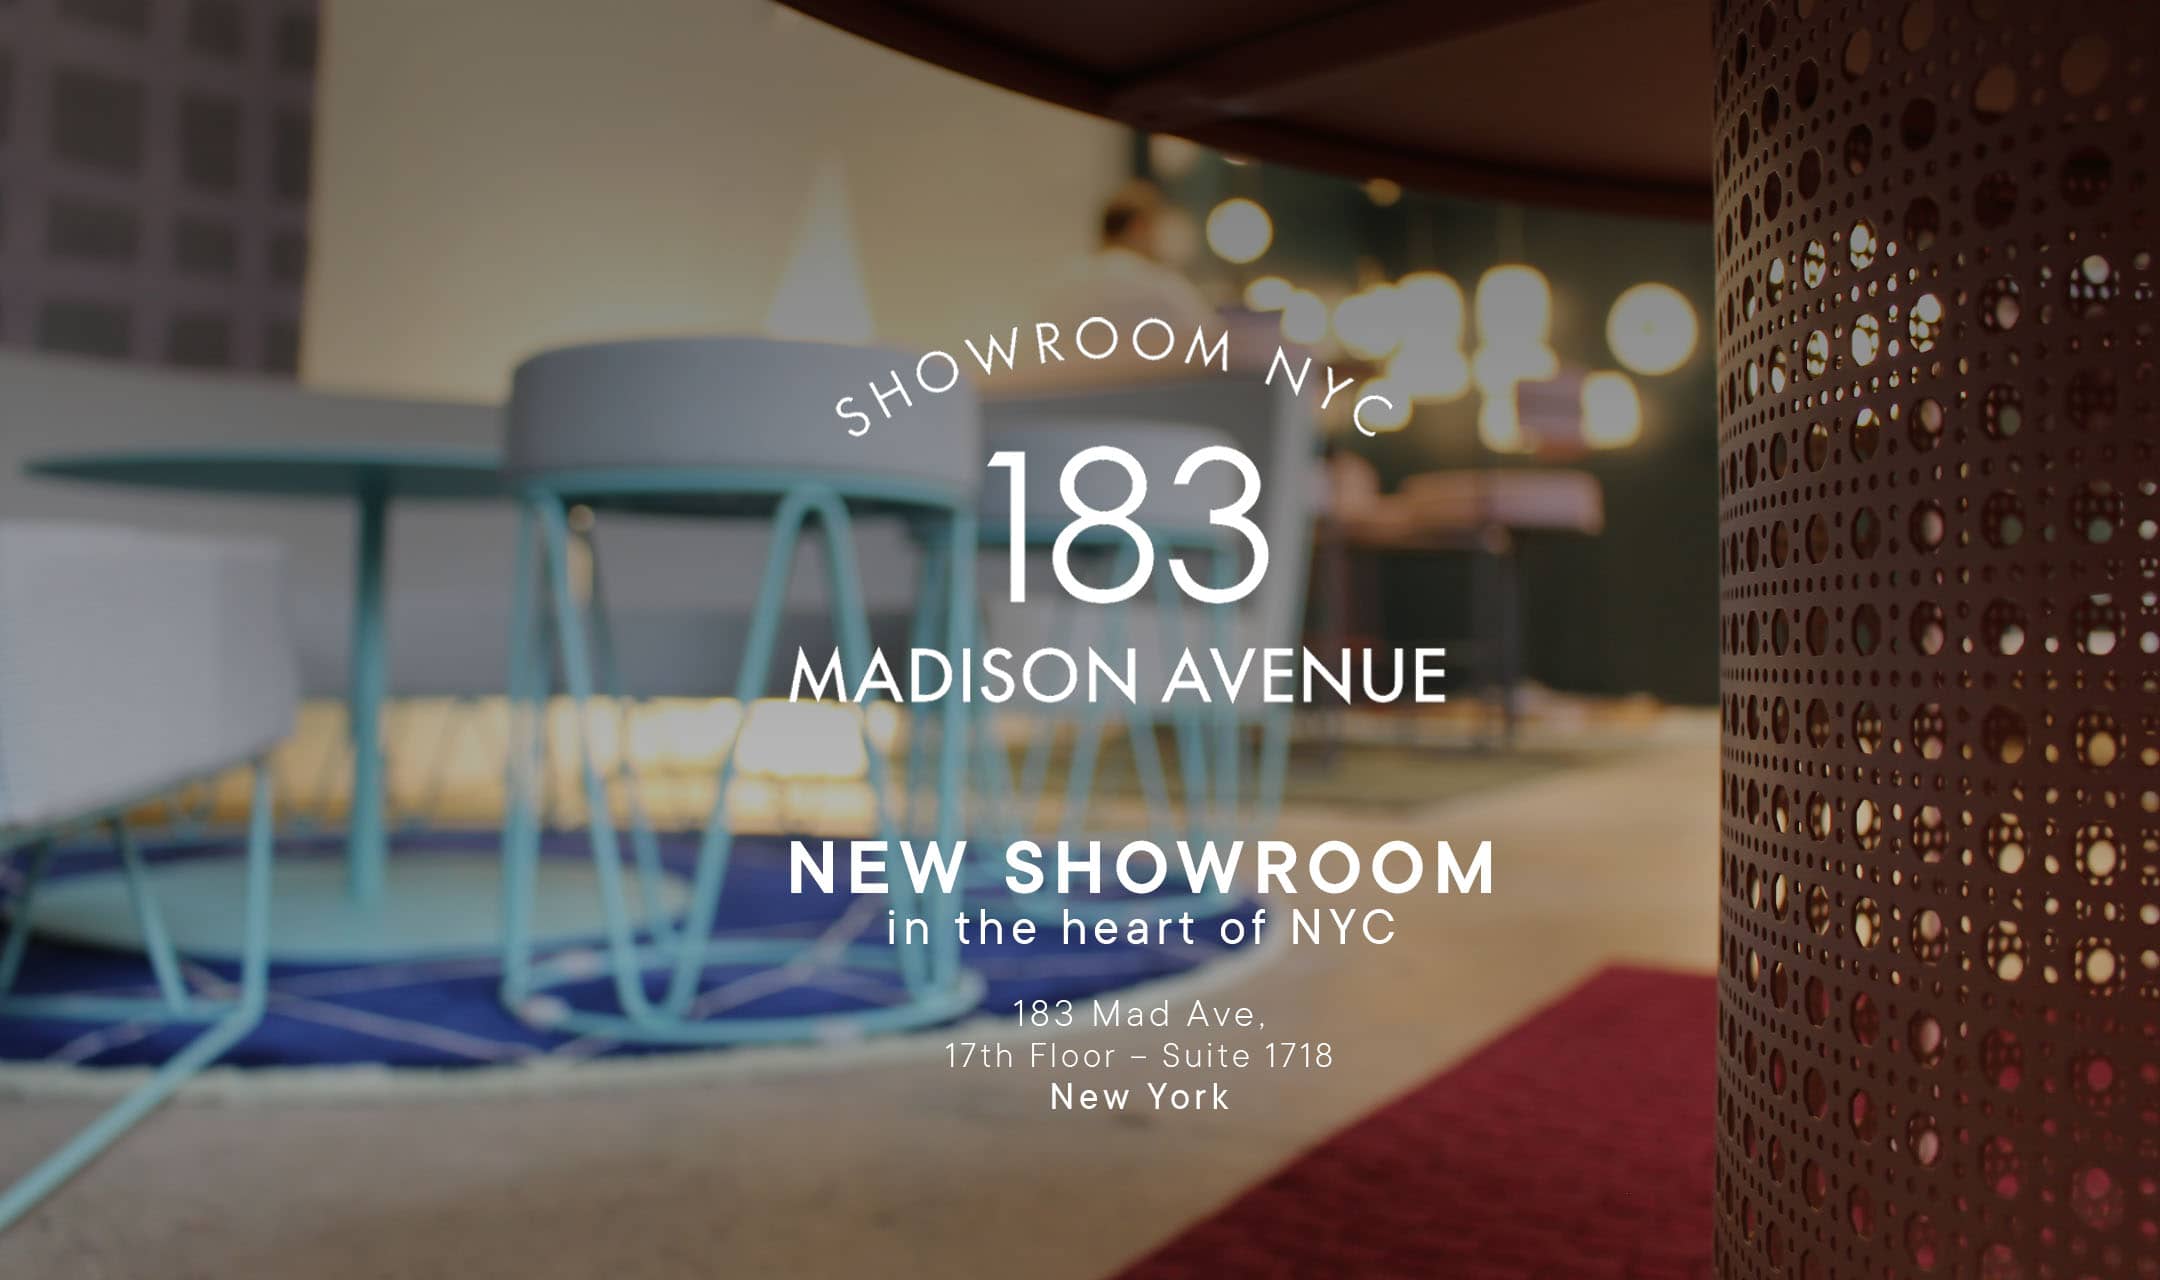 Opening a NEW Showroom in NYC!